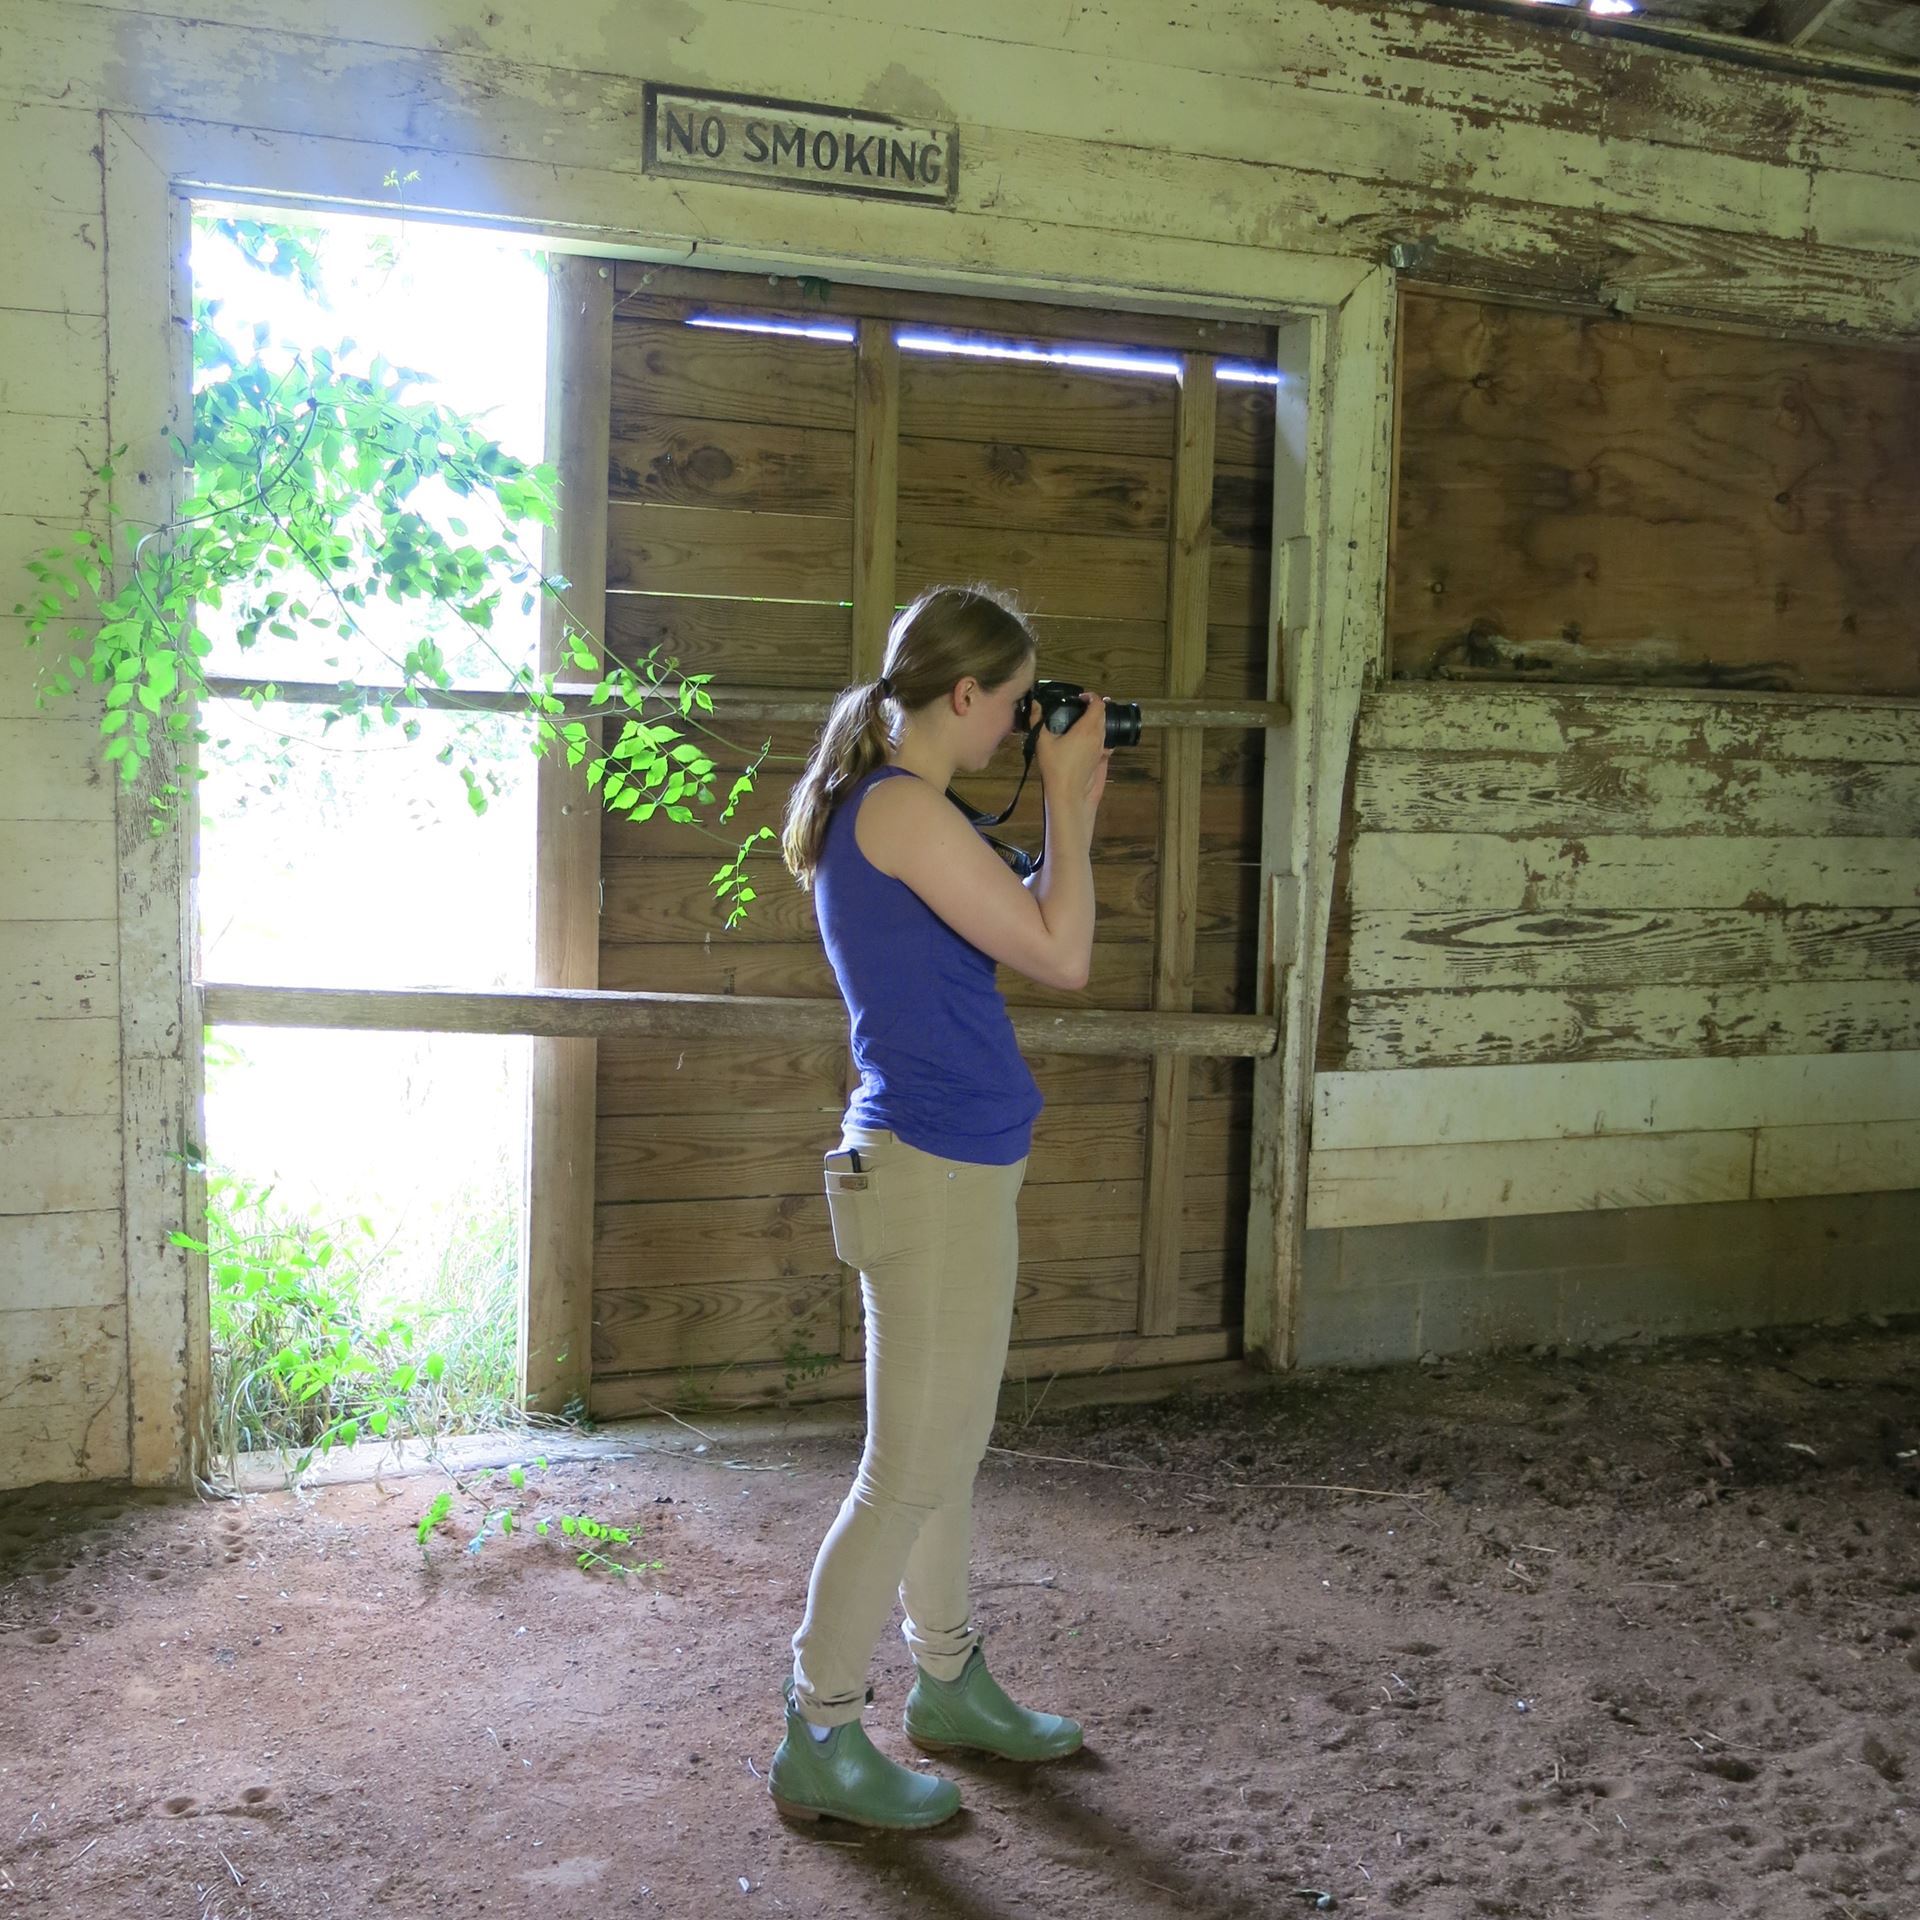 2019 Fellow, Mary Fesak of University of Delaware at her project site - the Race Barn Complex at Montpelier